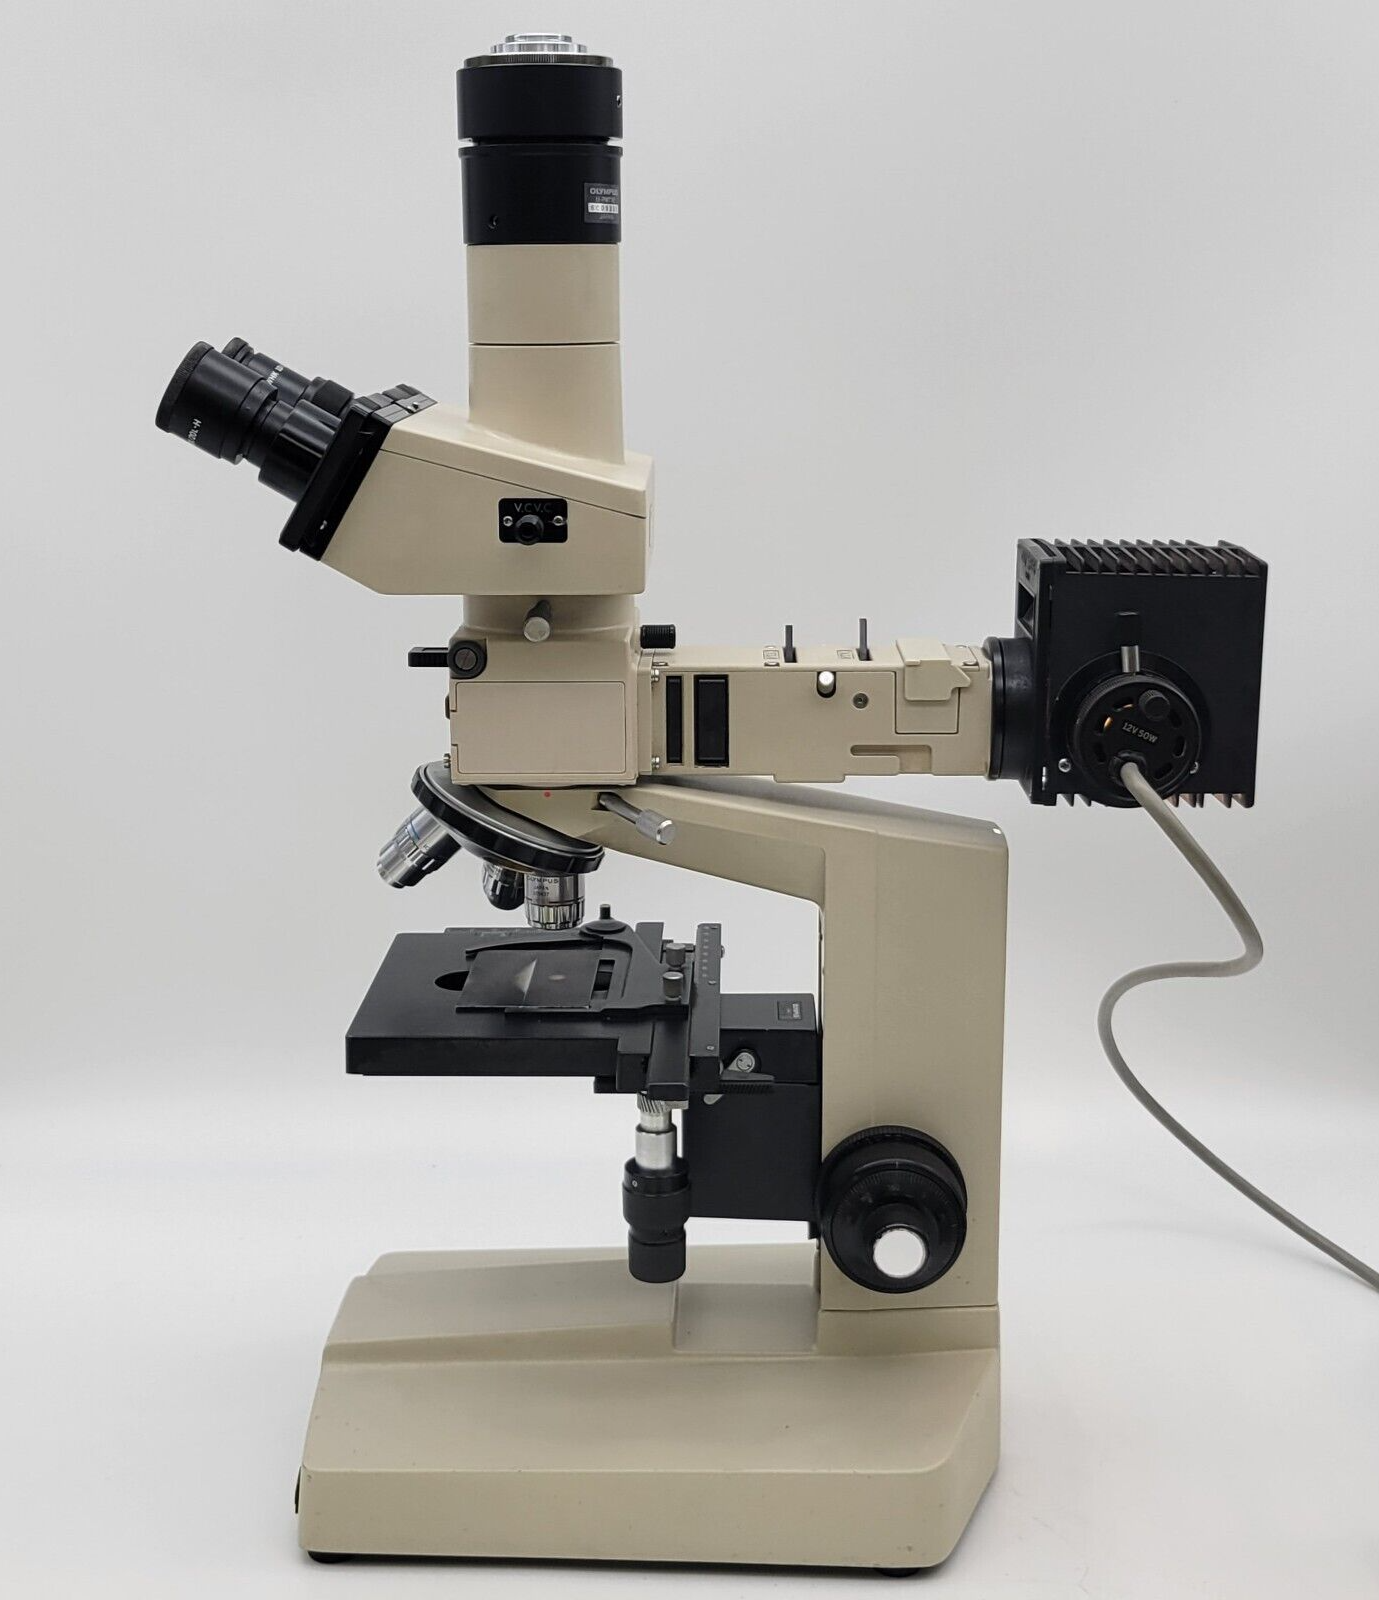 Olympus Microscope BH BHM Metallurgical with Reflected Light and Trinocular Head - microscopemarketplace